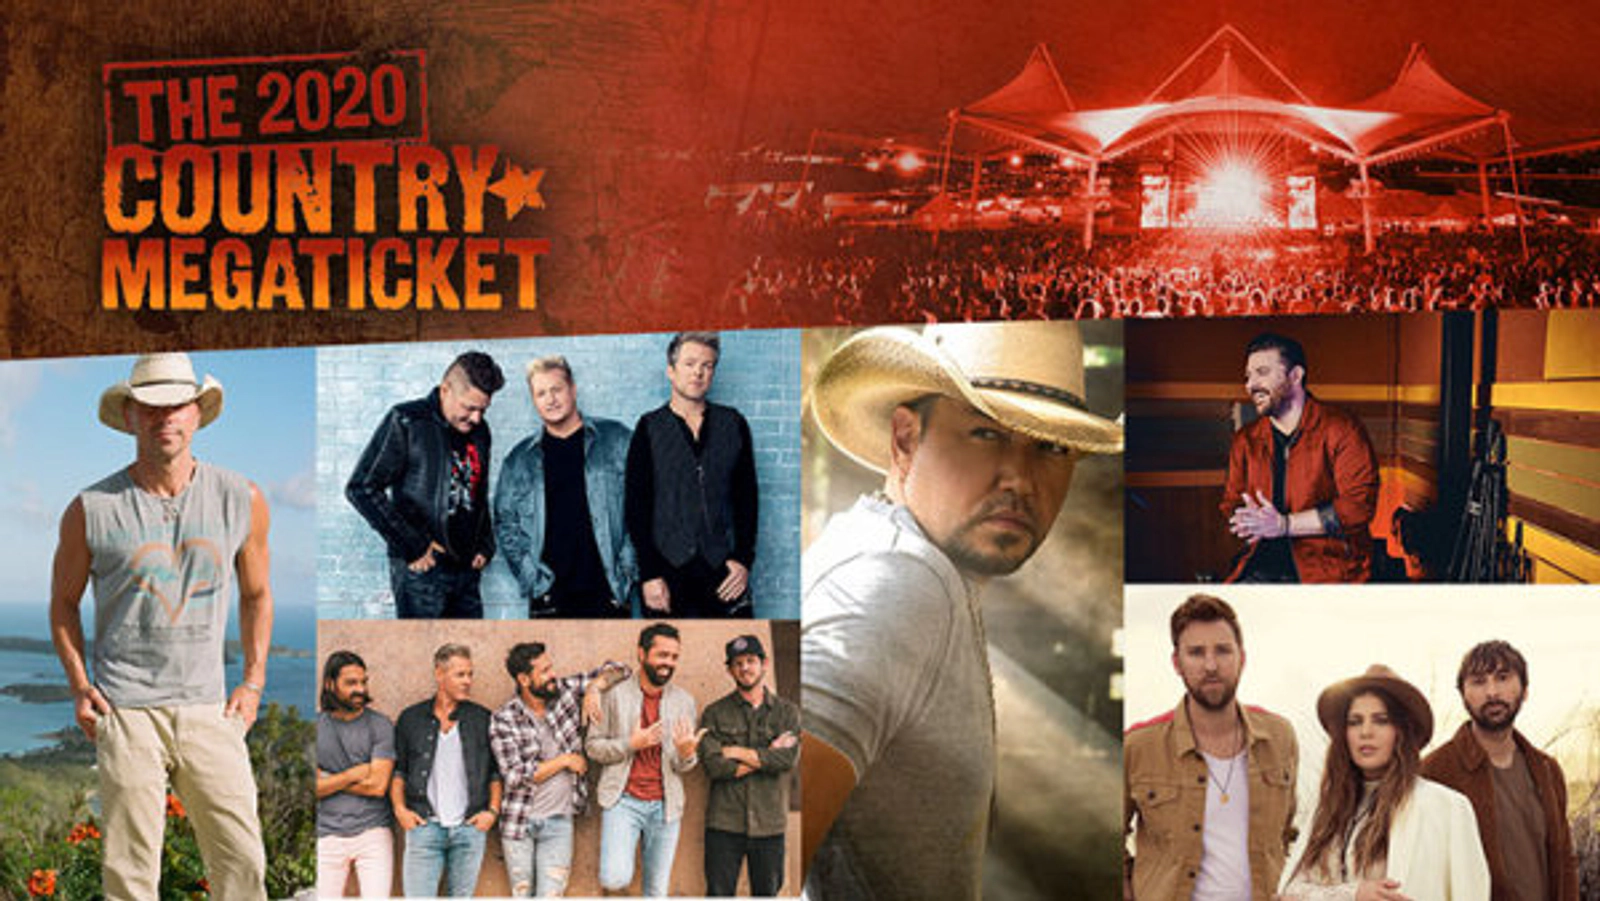 Win The 2020 Country Megaticket At The Walmart AMP! - Thumbnail Image